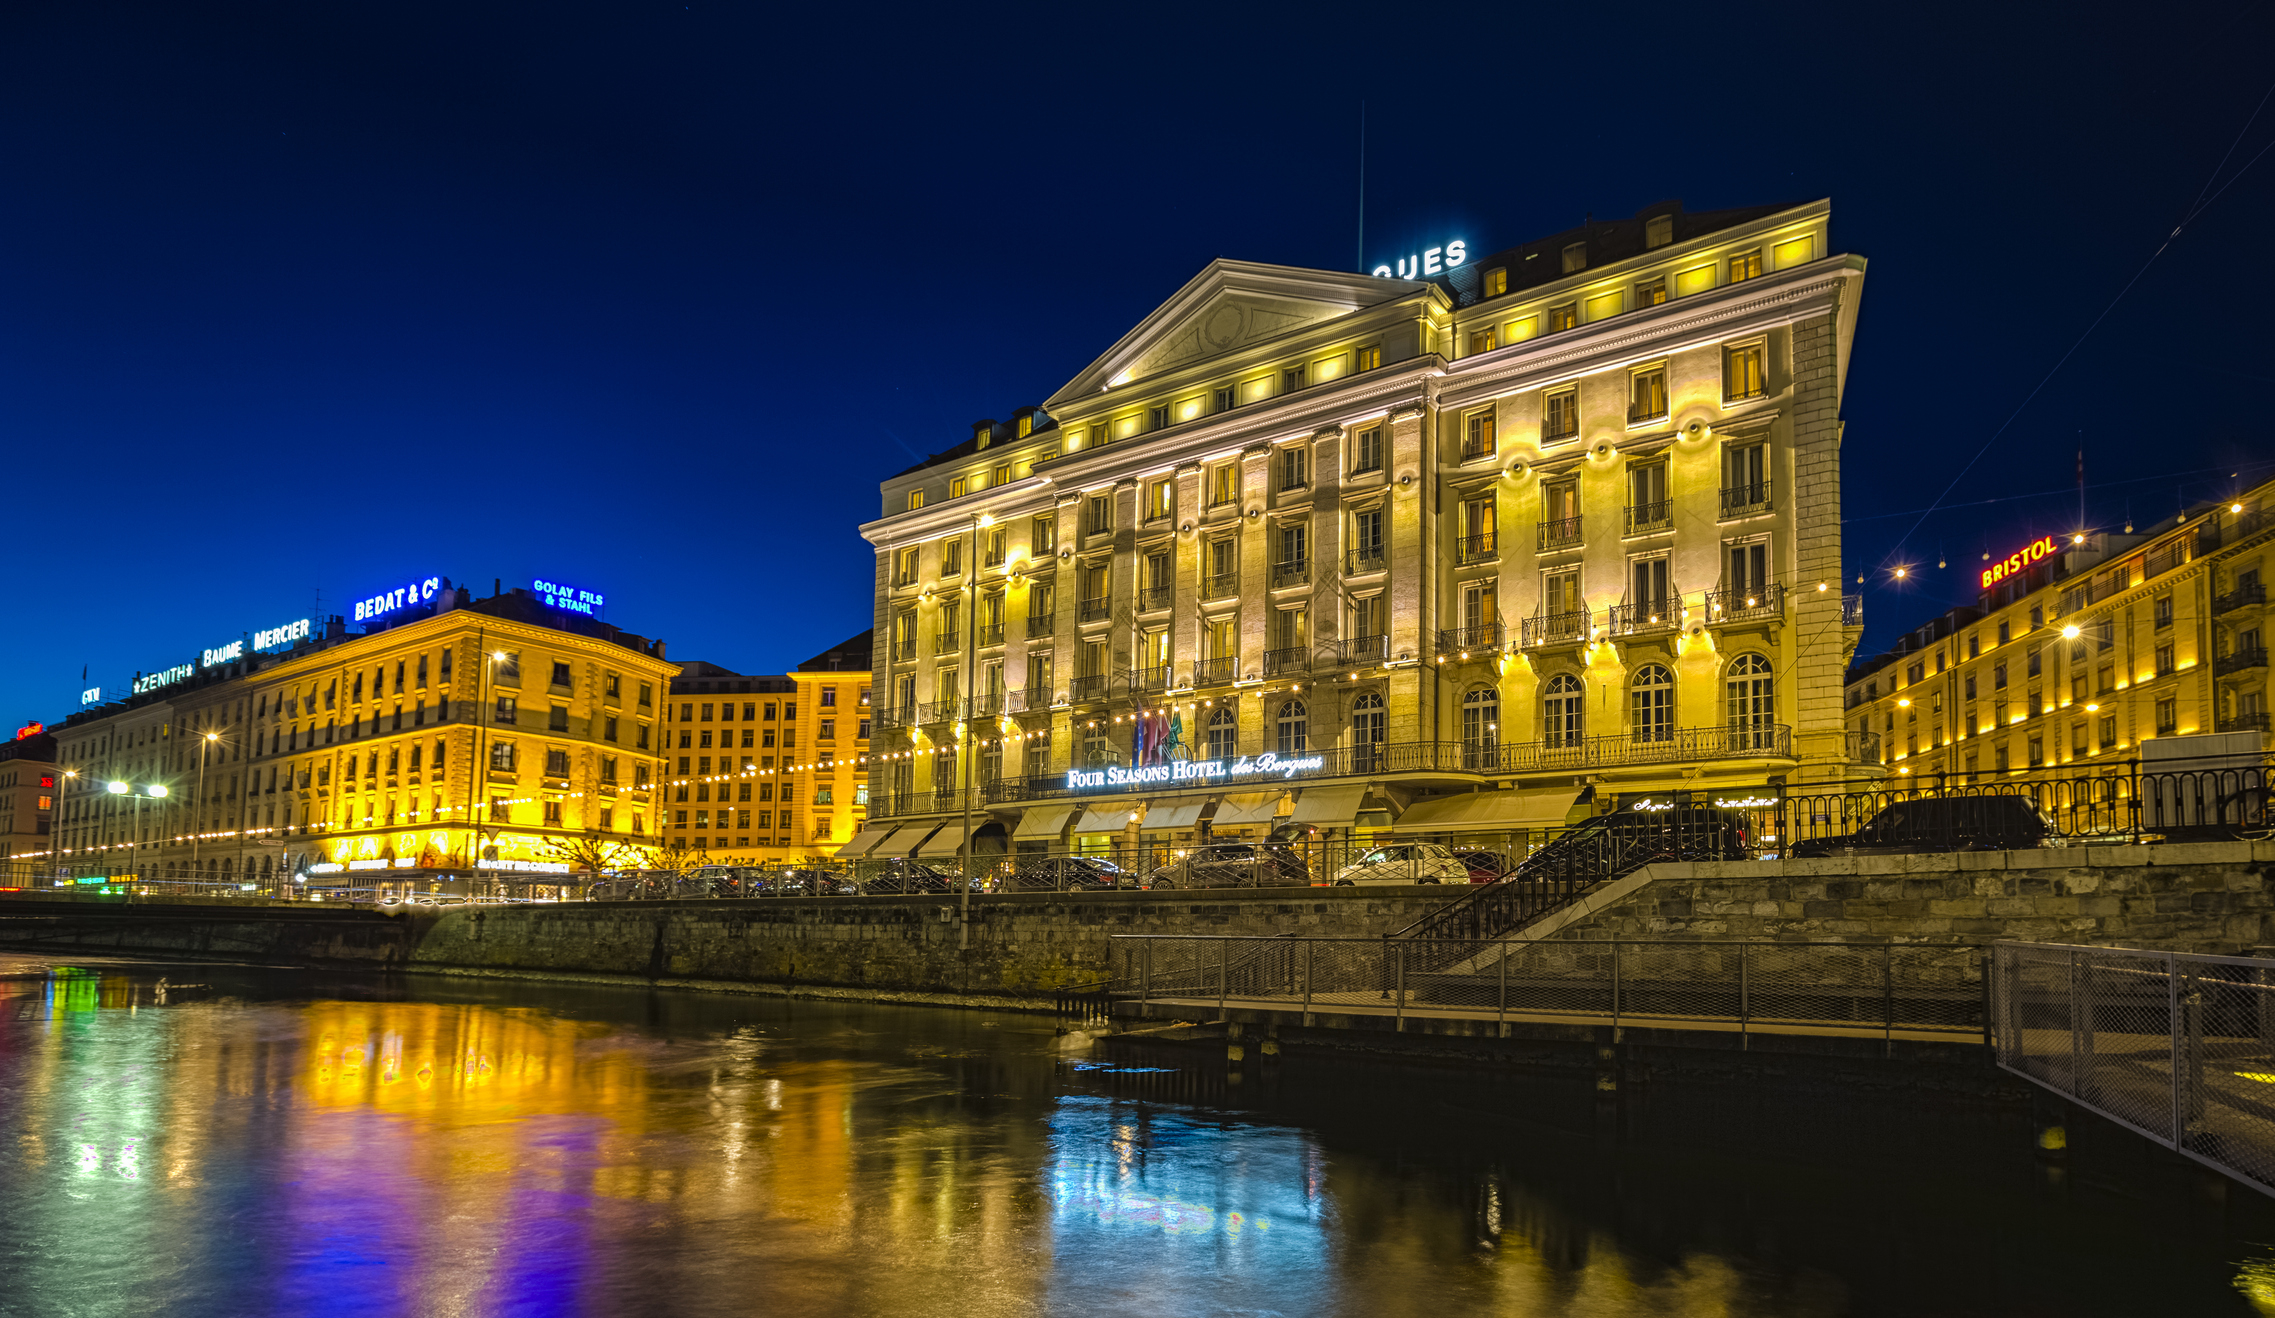 Evening view of a brightly lit hotel by a river with reflections on the water